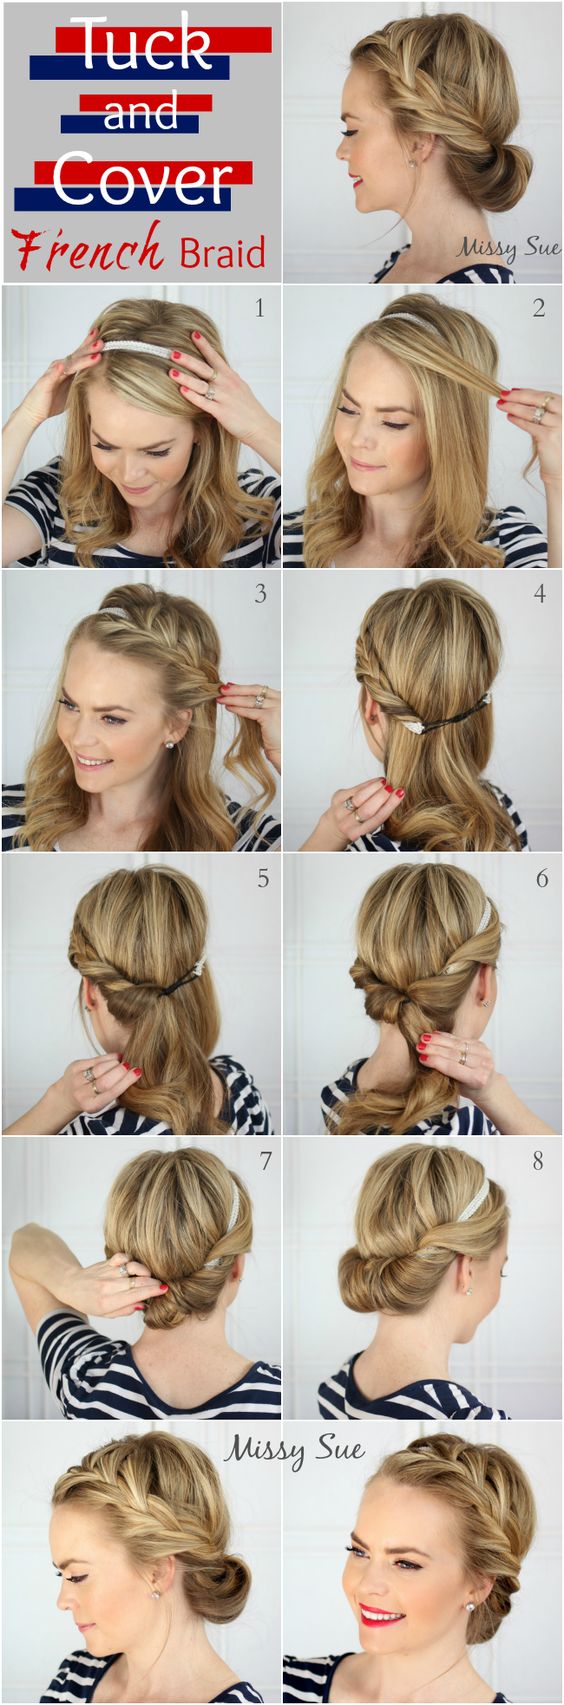 7 Quick And Easy Hairstyles For School - YouTube